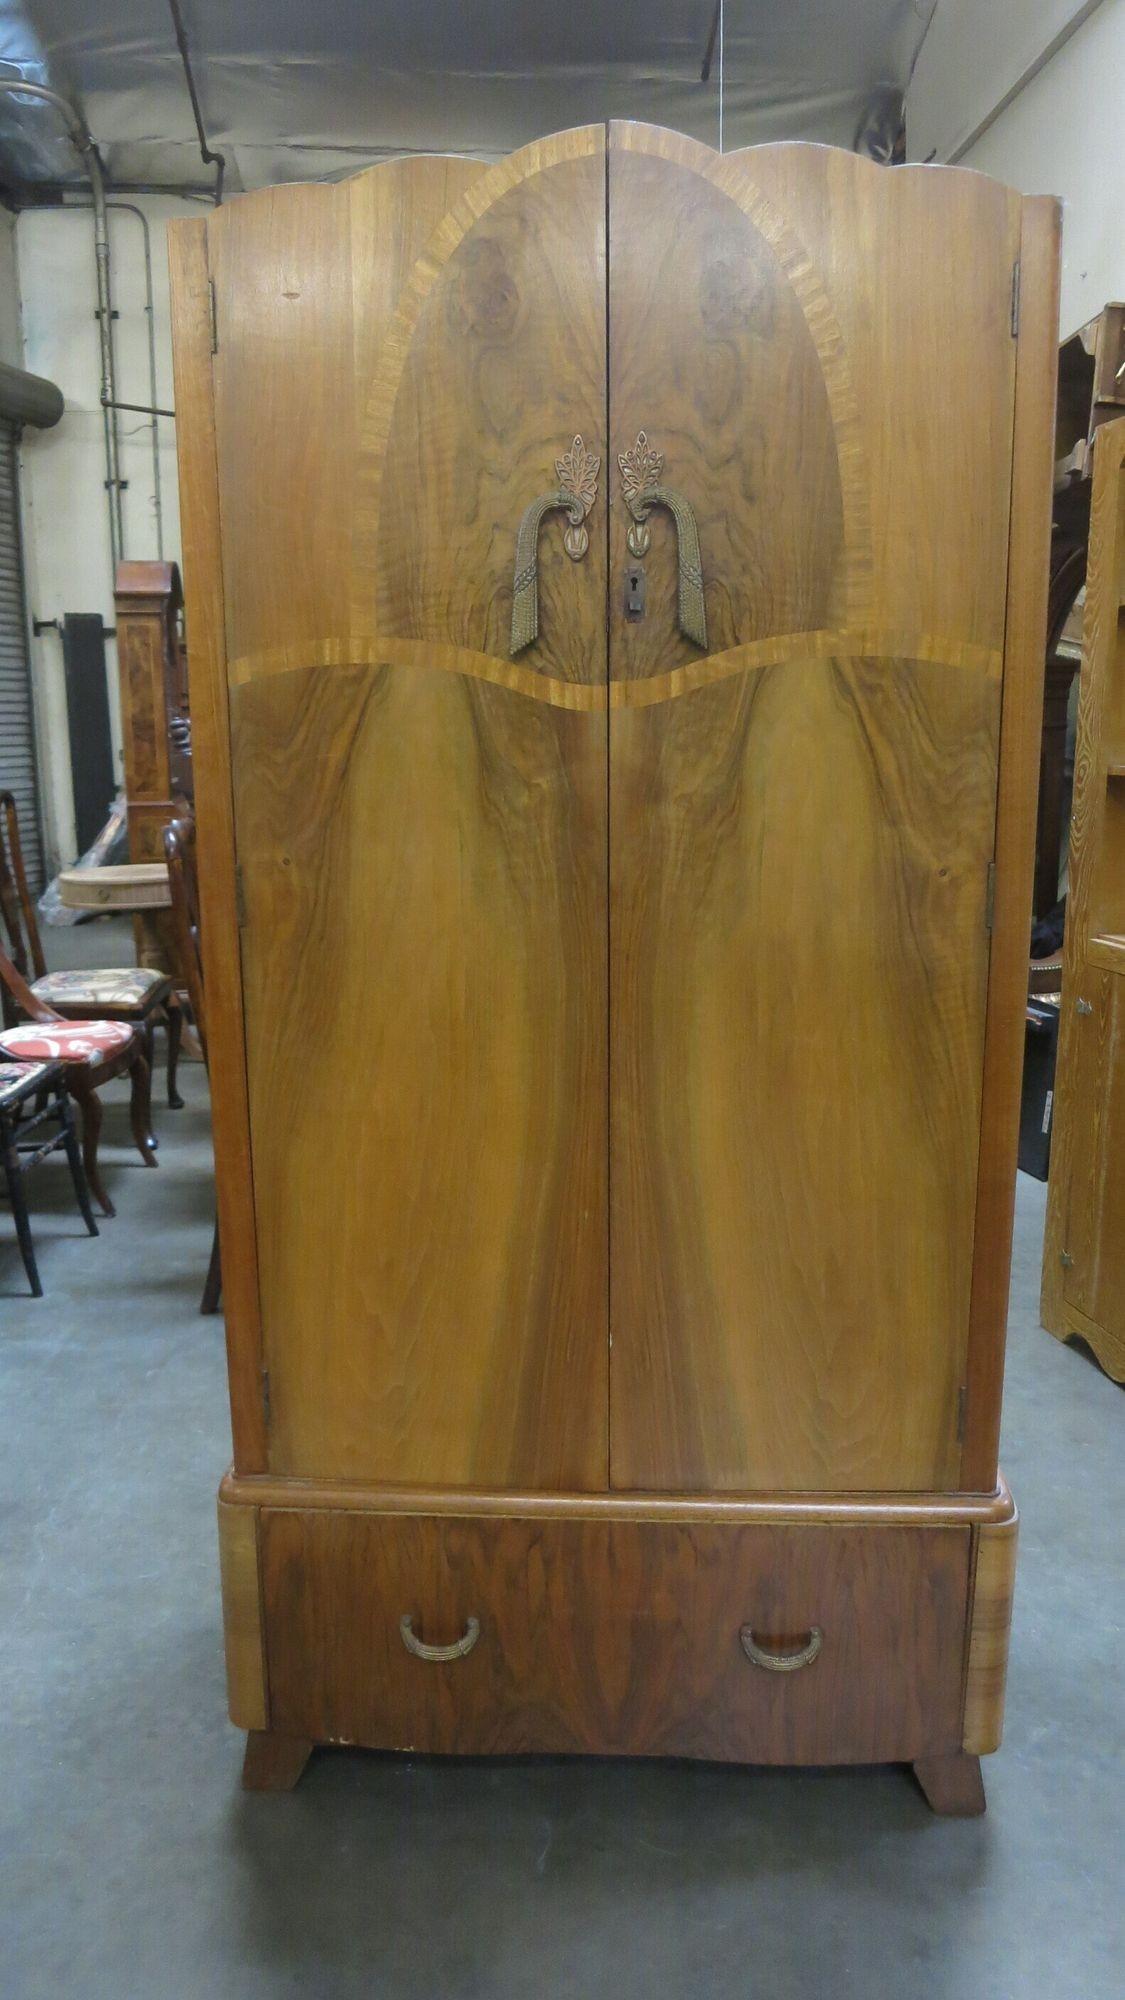 Beautiful Antique Wardrobe marked C.W.S. LTD Cabinet Factory Enfield

(Please take advantage on the viewing times to see this beauty)